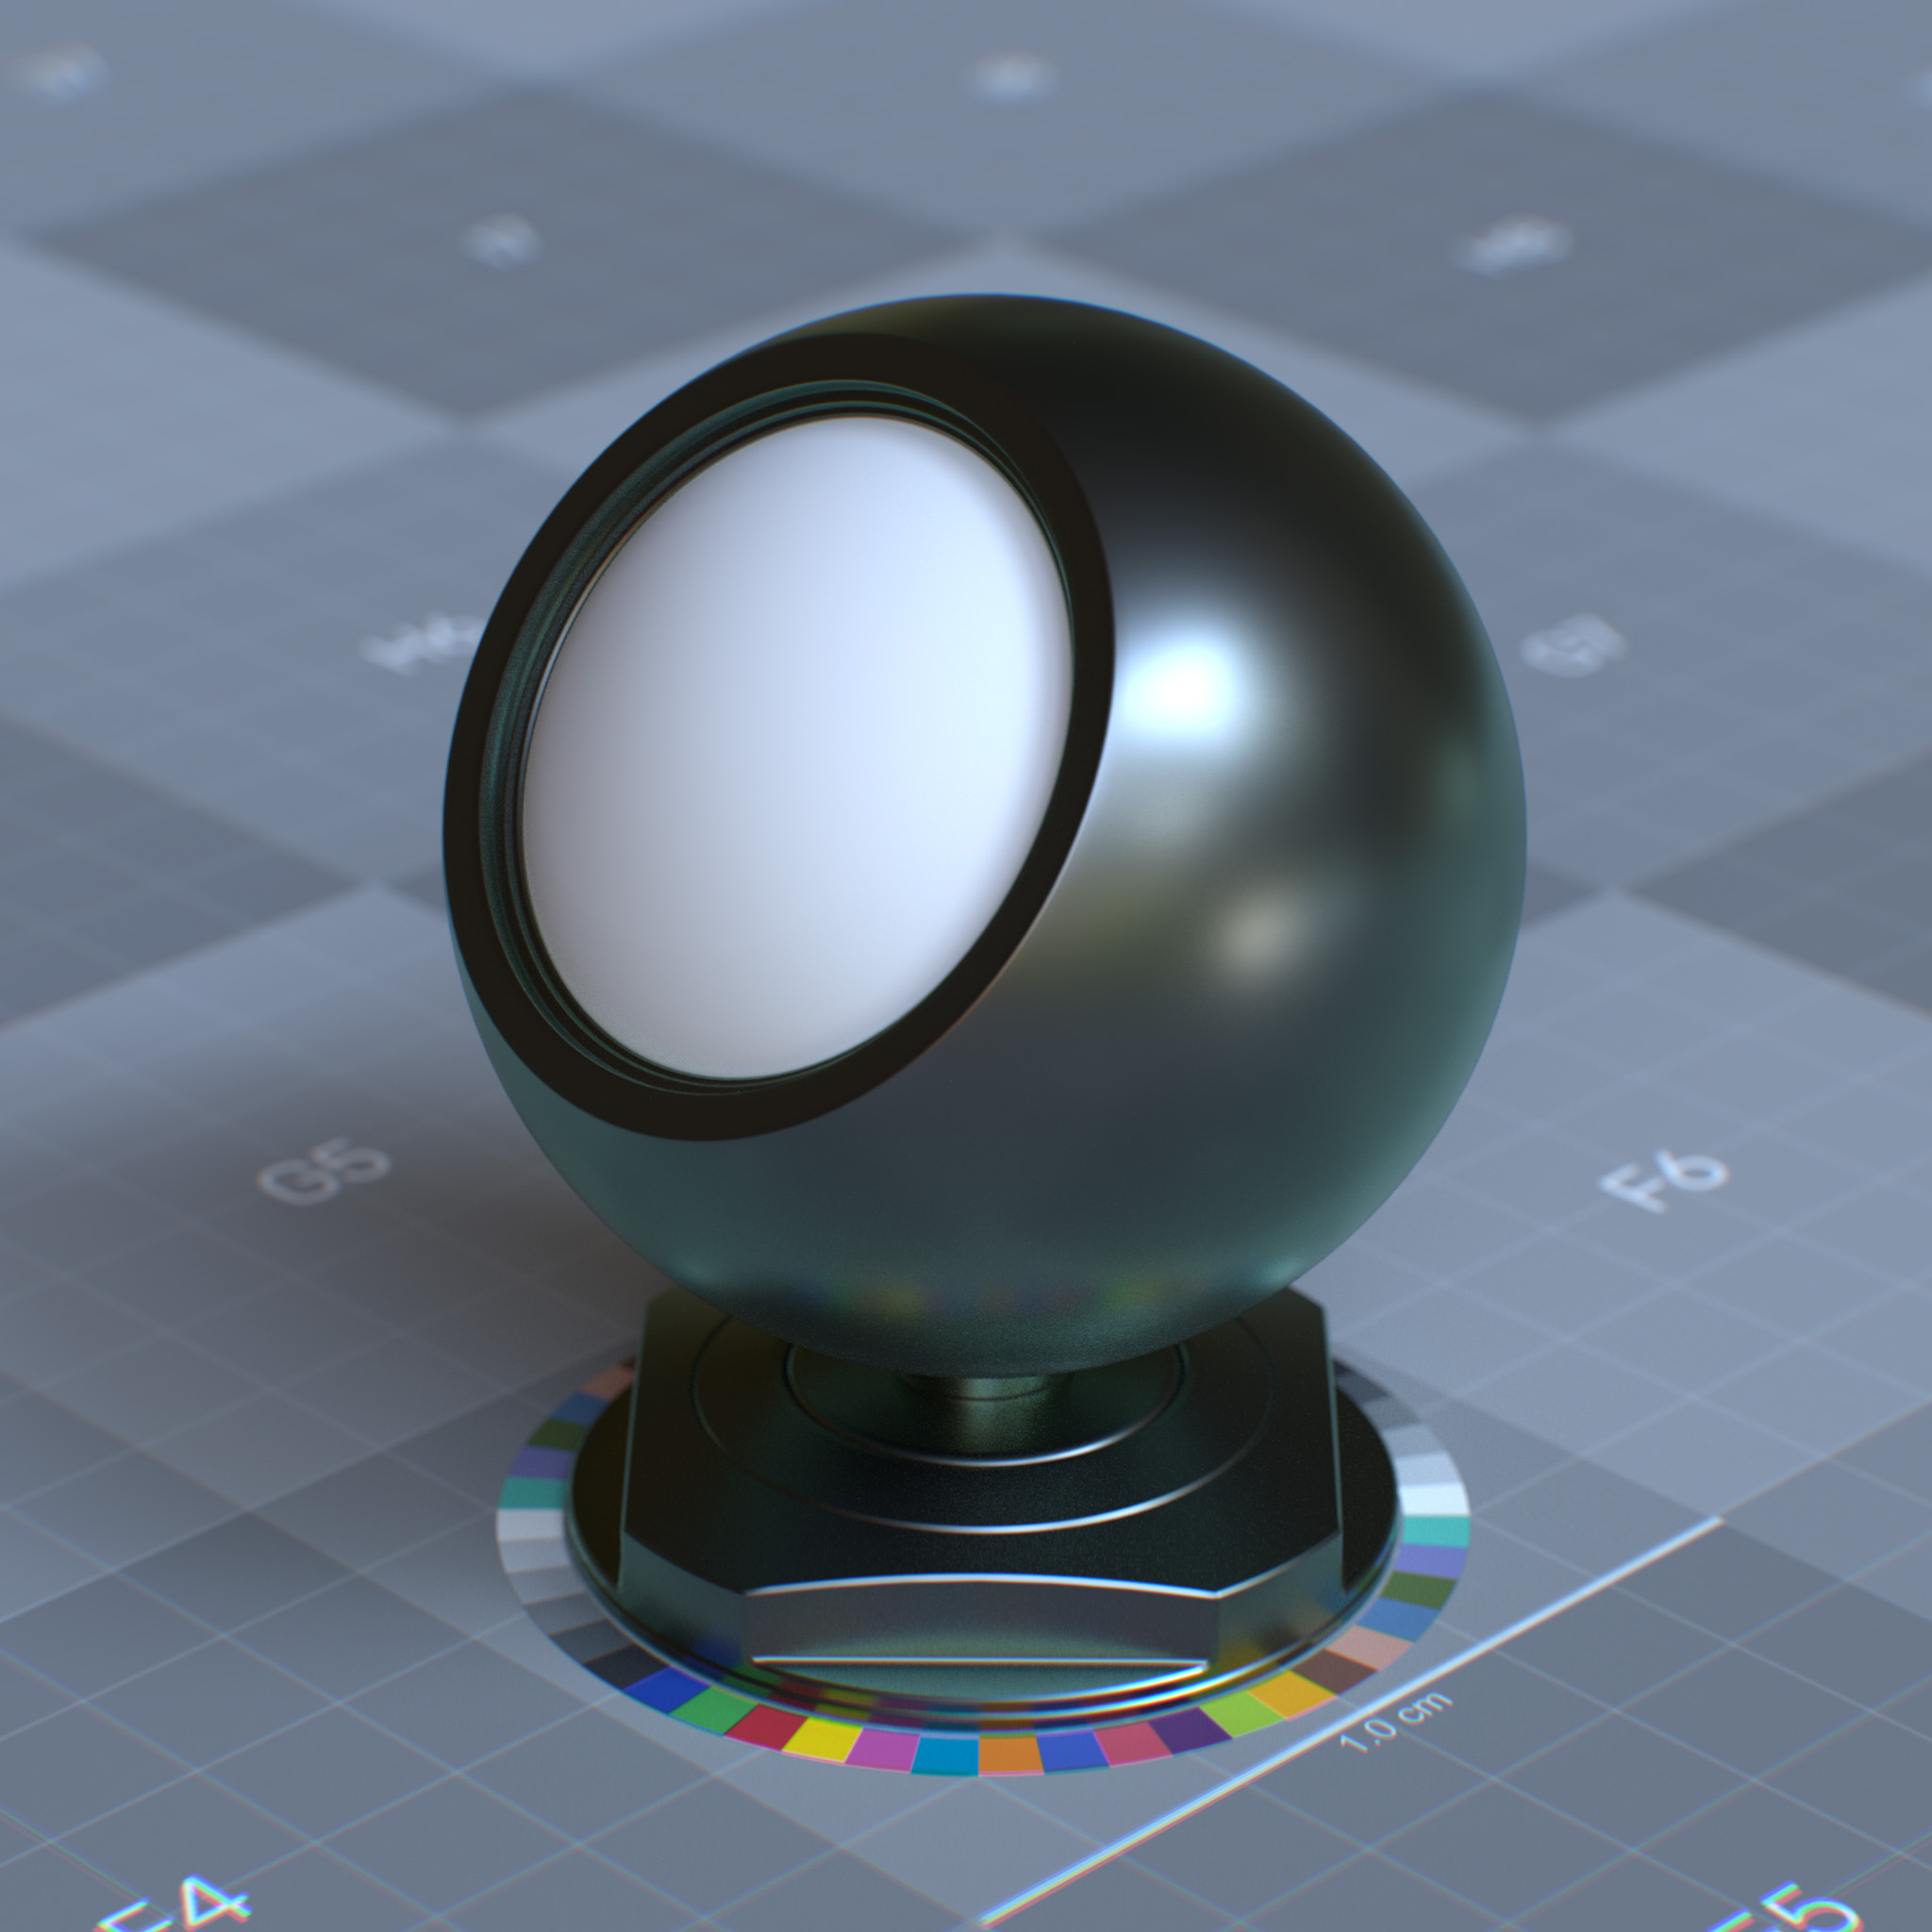 rtx_material_omnisurfacebase_specular_reflection_weight_1p0_metalness_edge_tint